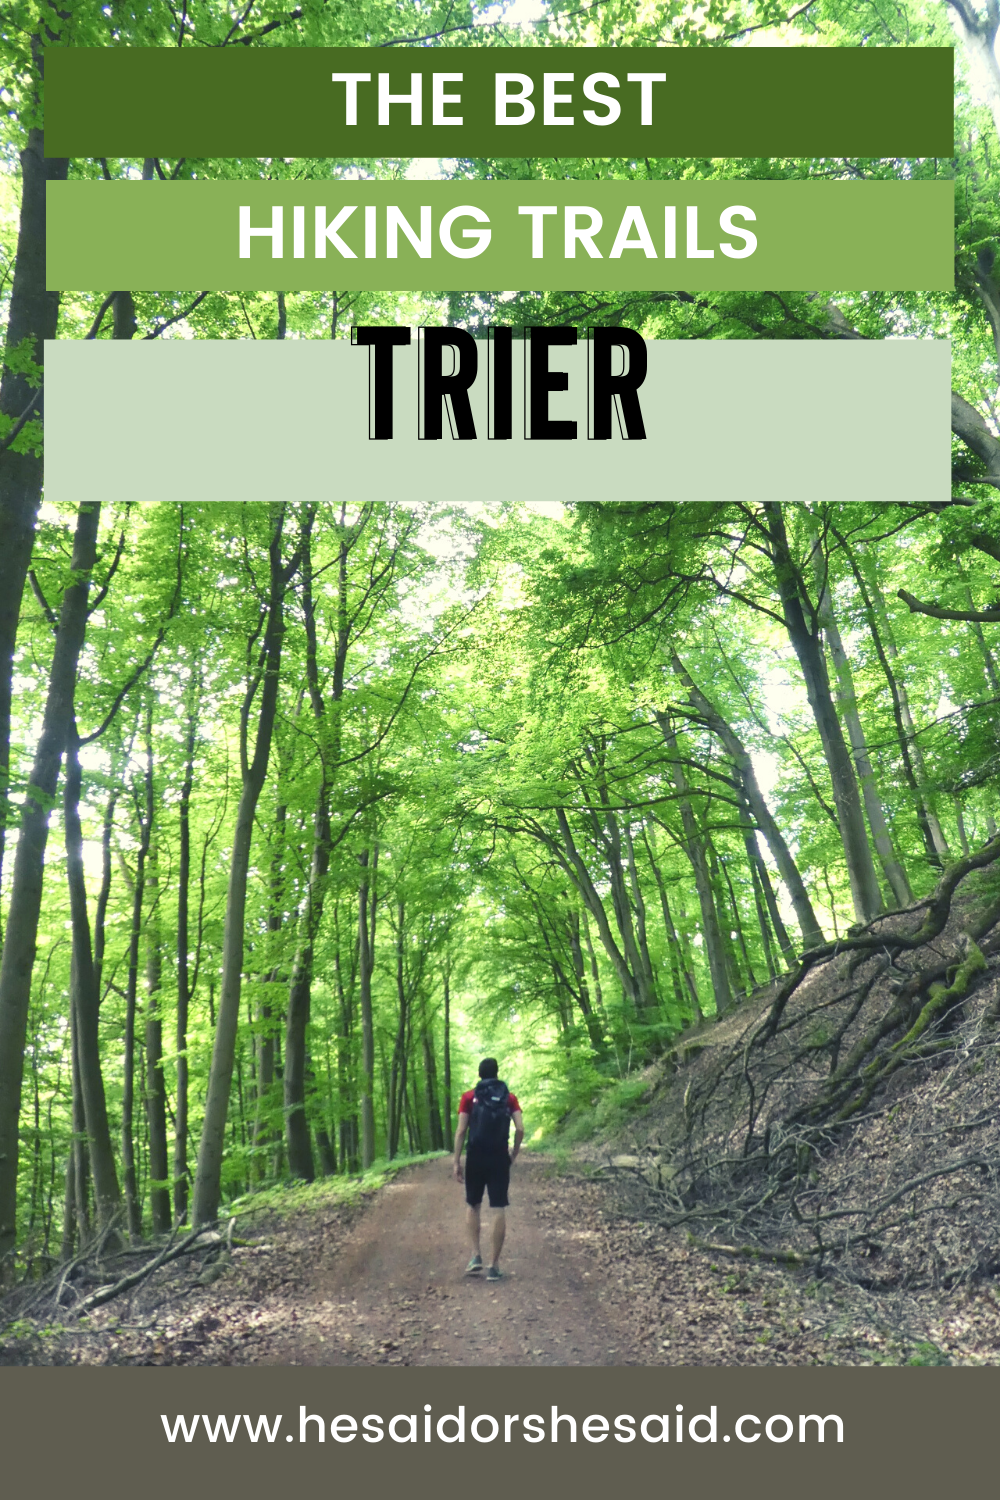 The best hiking trails in and around Trier by hesaidorshesaid